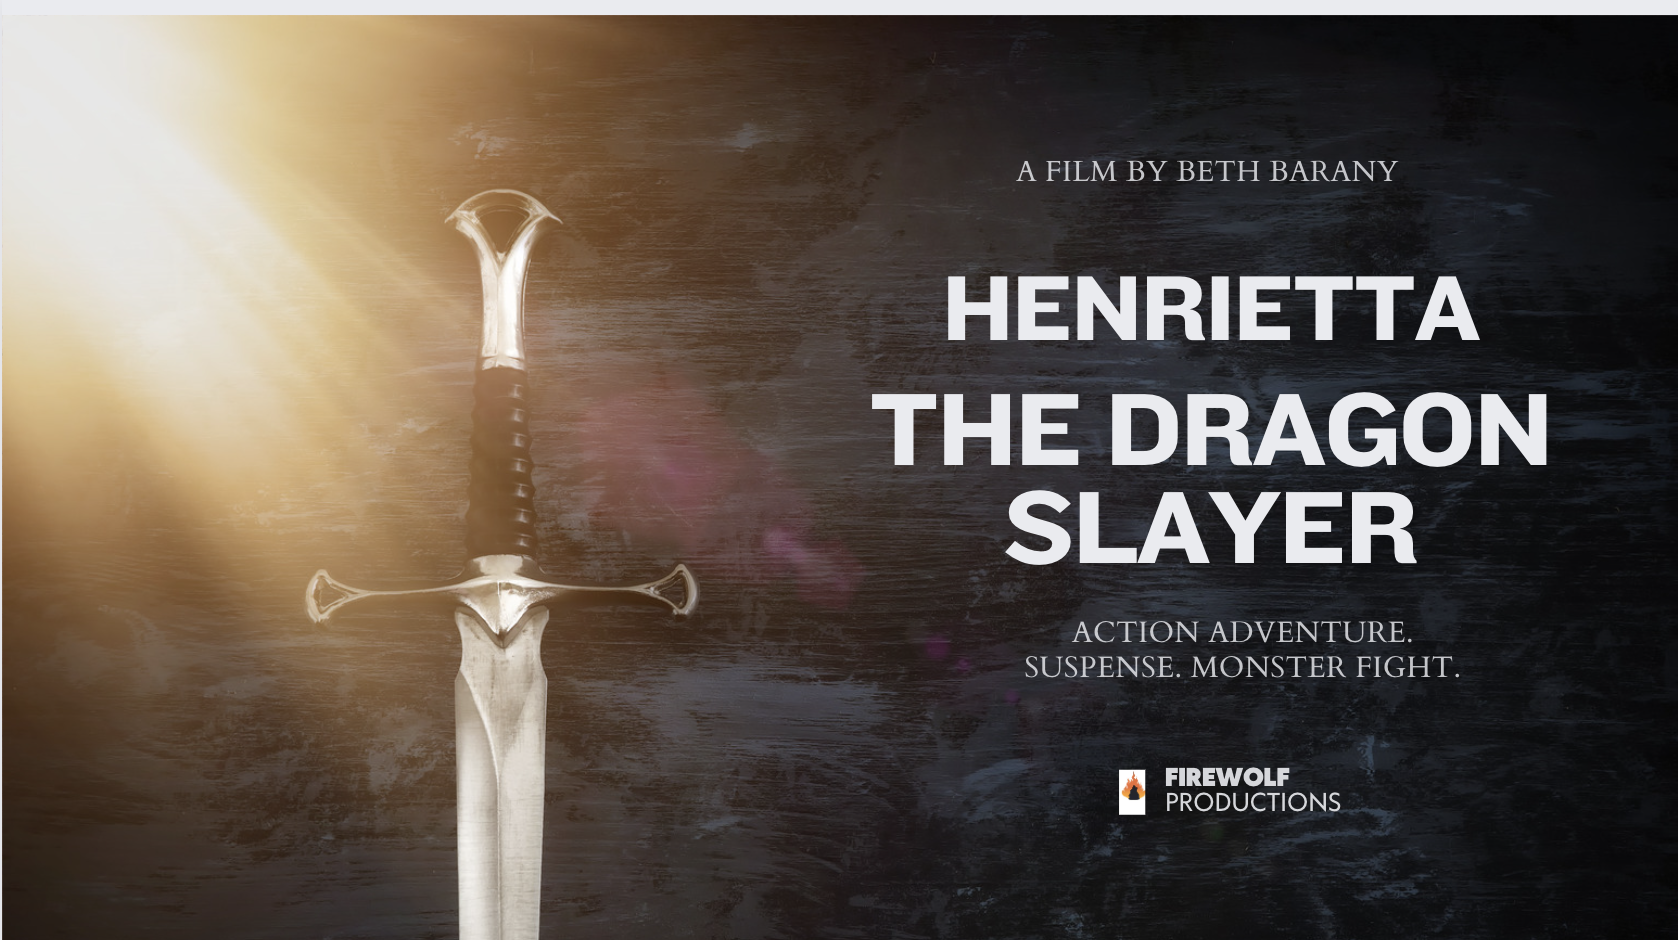 Henrietta The Dragon Slayer film, by Beth Barany, A short film of adventure fantasy with magic, friendship, and a chimera monster fight. The instinct to fight vs. the instinct to trust.